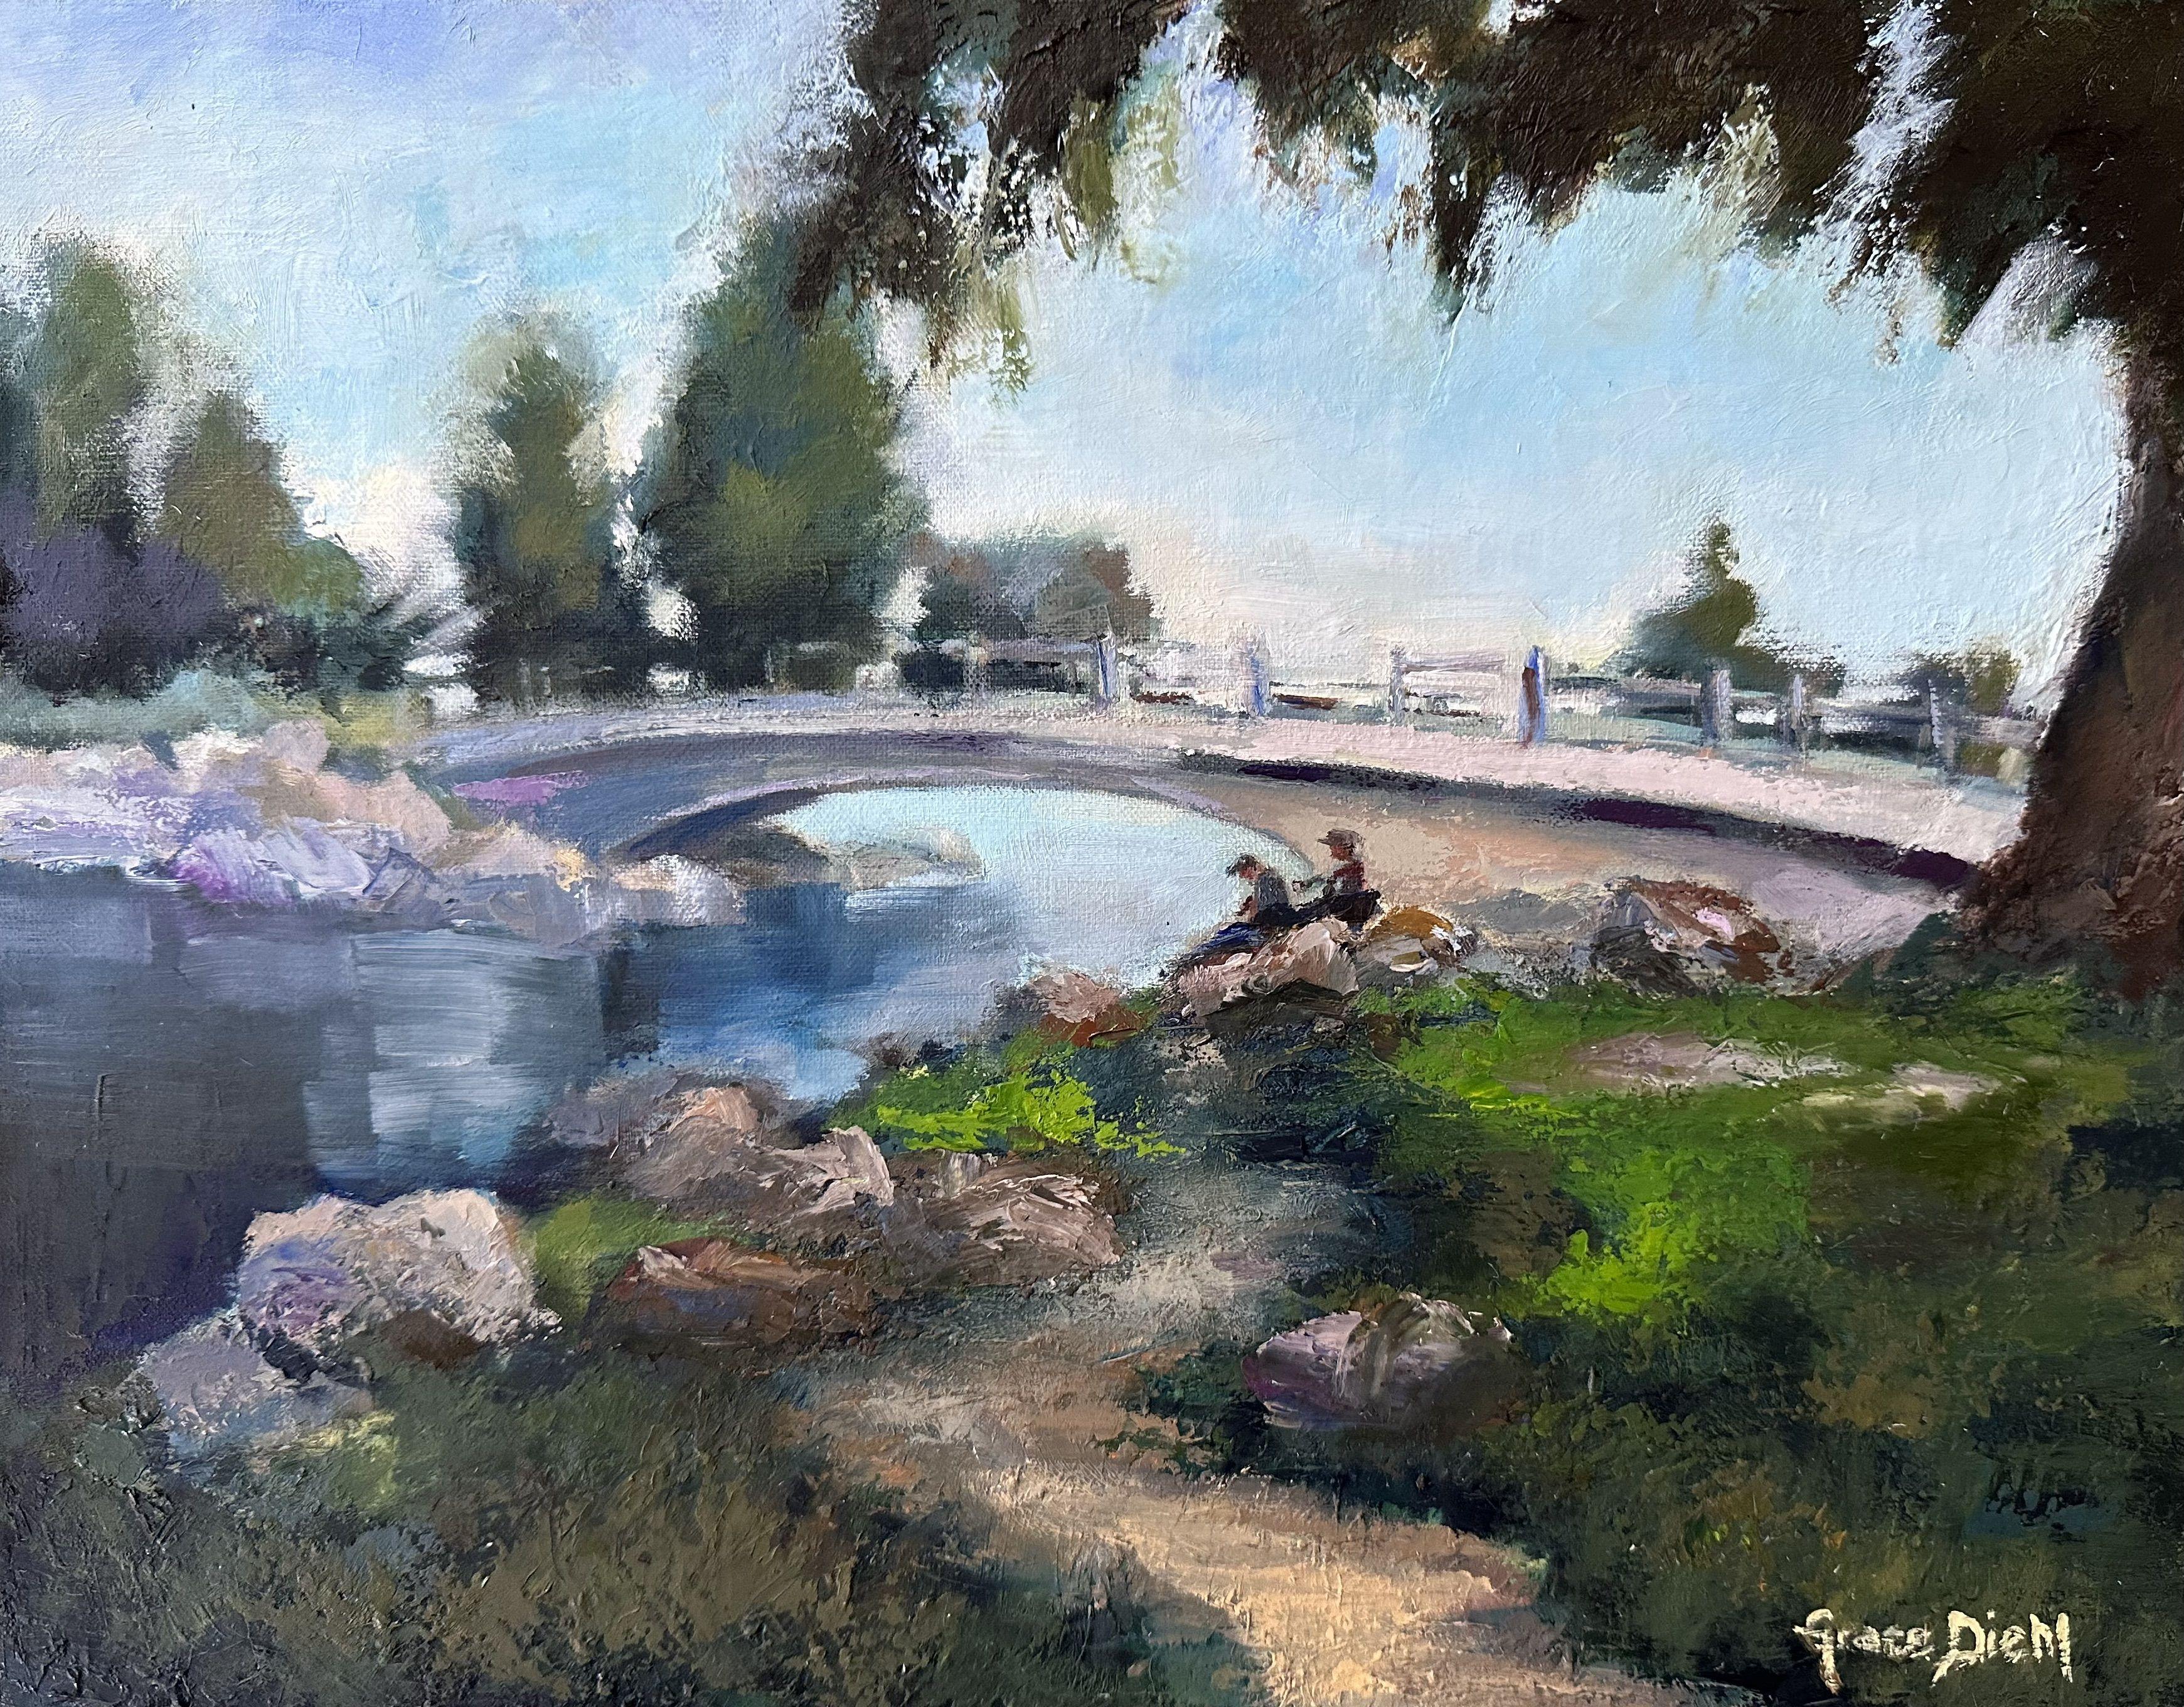 As a fine artist, I love to find peaceful moments in the world around me and capture them in my paintings. One such moment that I recently painted was during a bike ride with my family, when we stopped at a park for a break.  The scene was a quiet